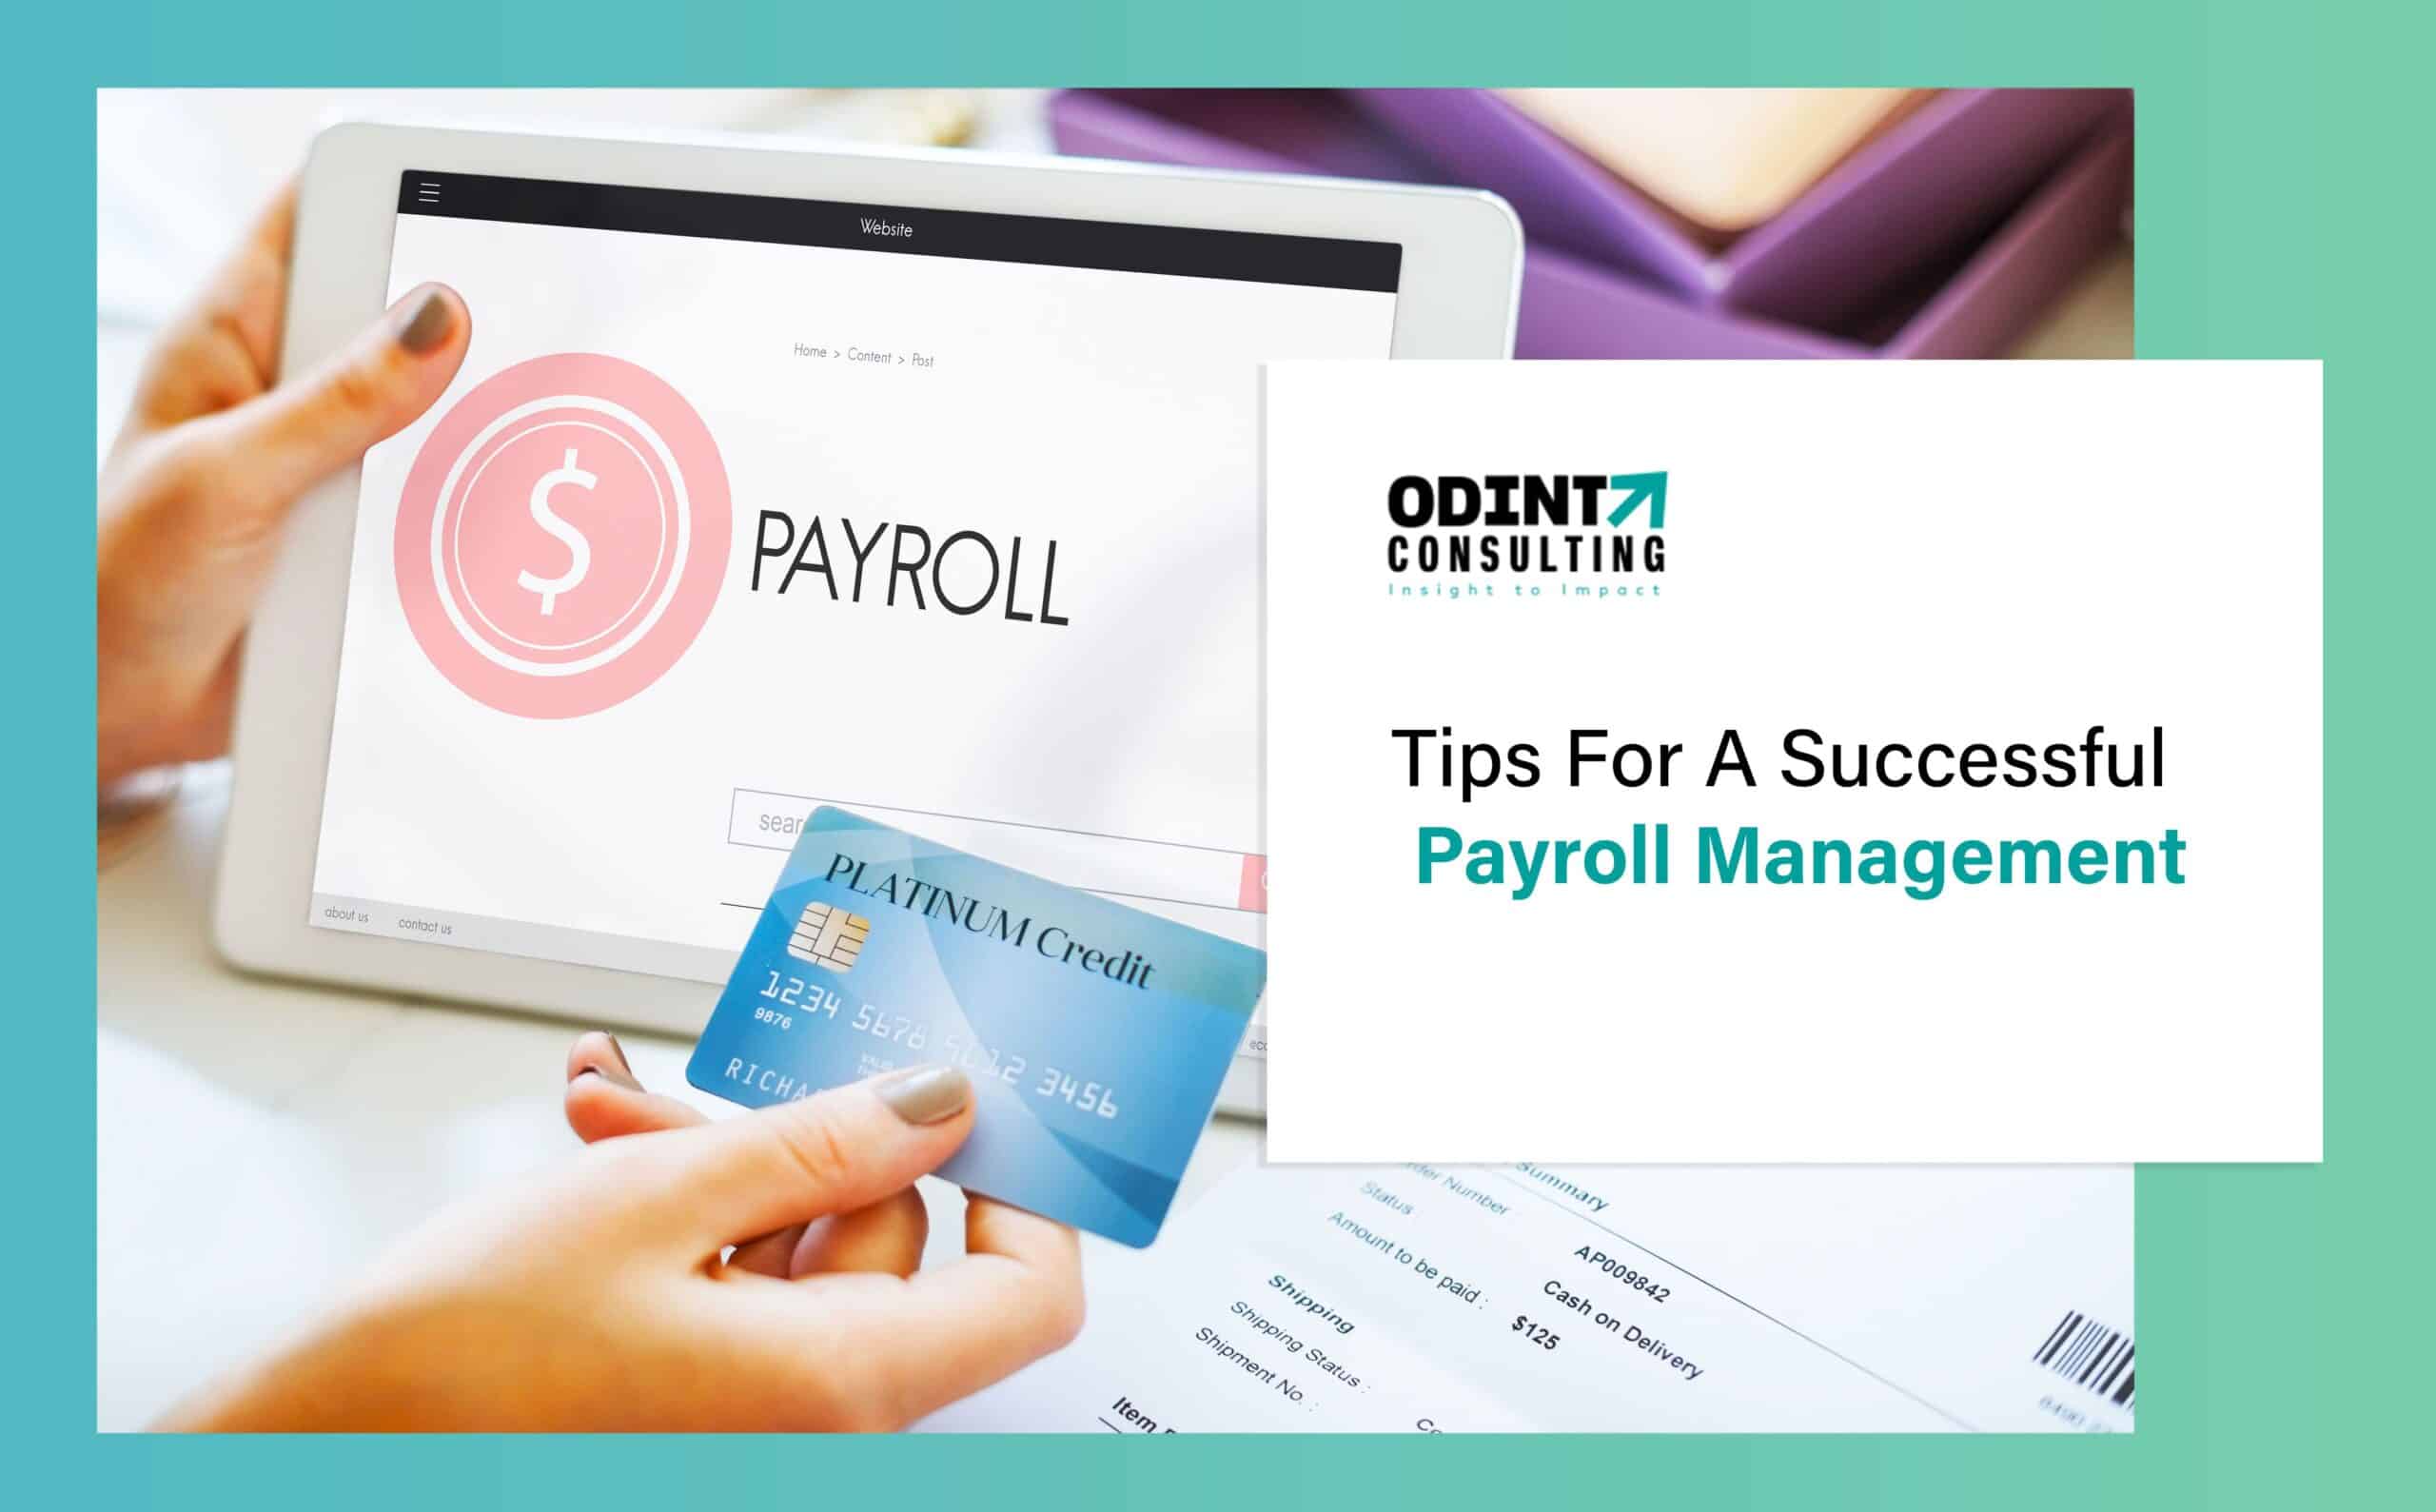 Tips For A Successful Payroll Management: Methods To Follow